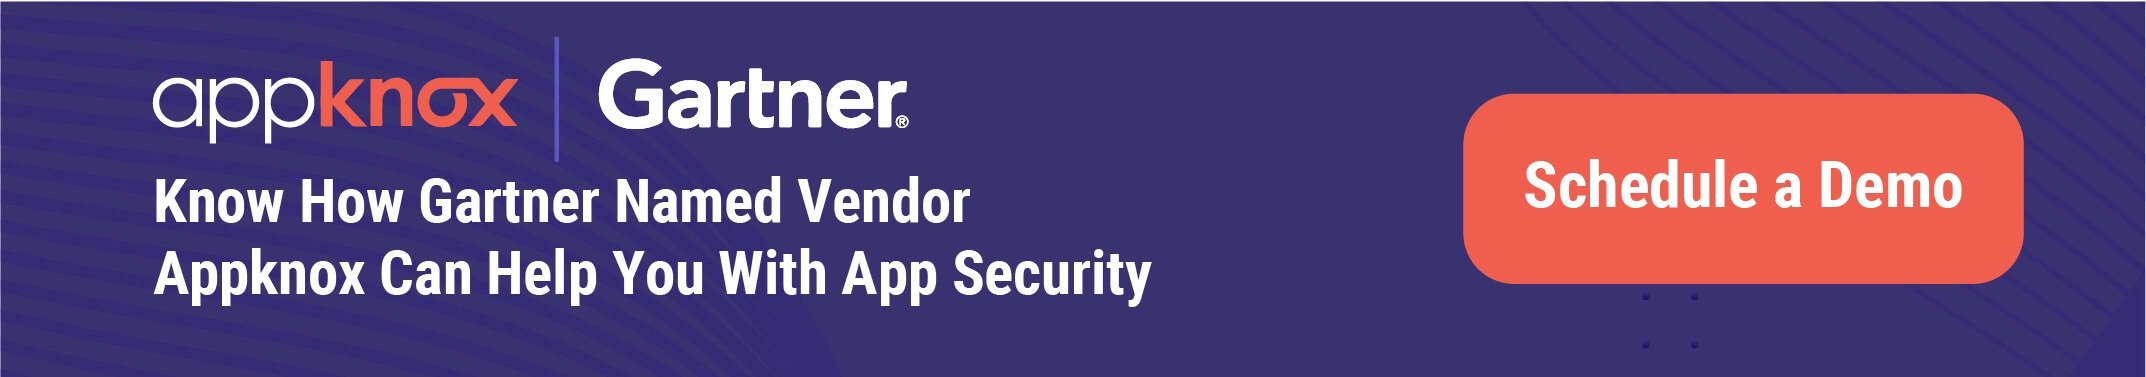 Appknox - Schedule Mobile Security